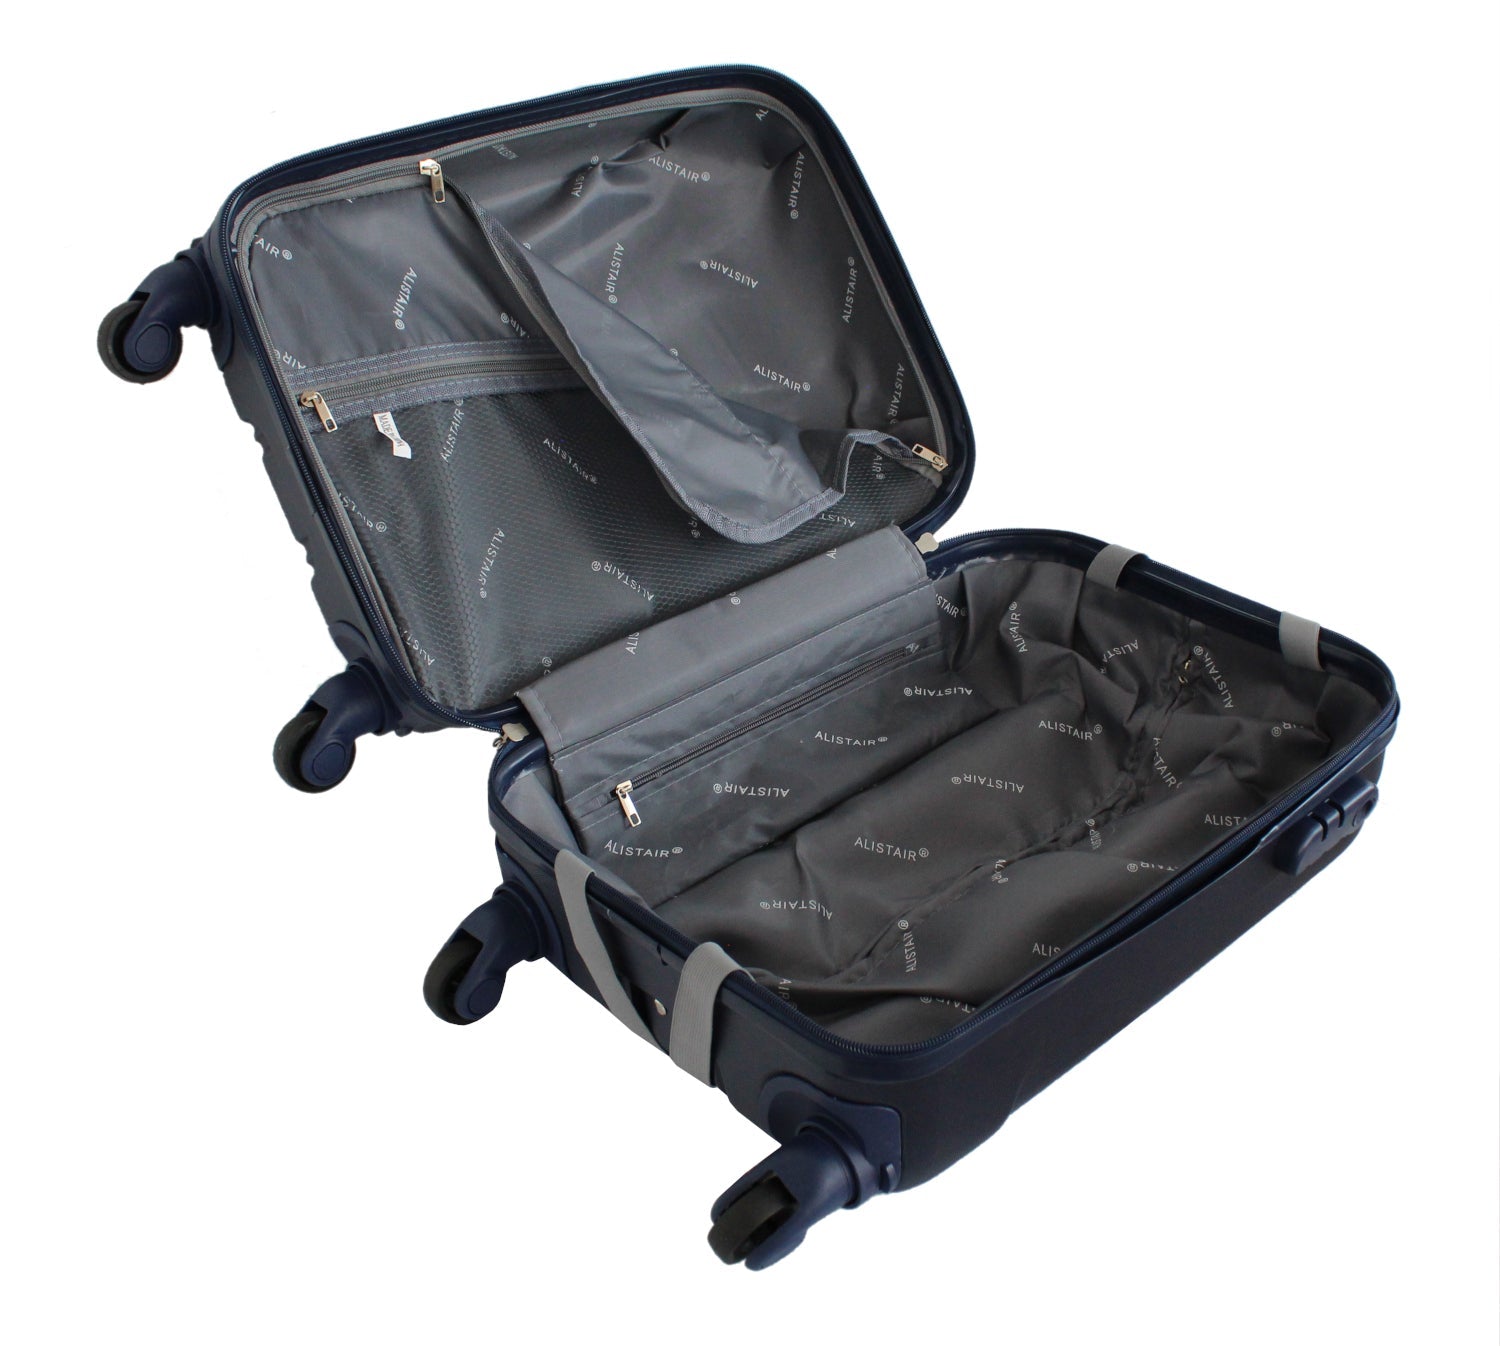 ALISTAIR Airo 2.0 - Valise Taille Cabine 52cm Alistair Airo - Spécial Compagnie Low Cost